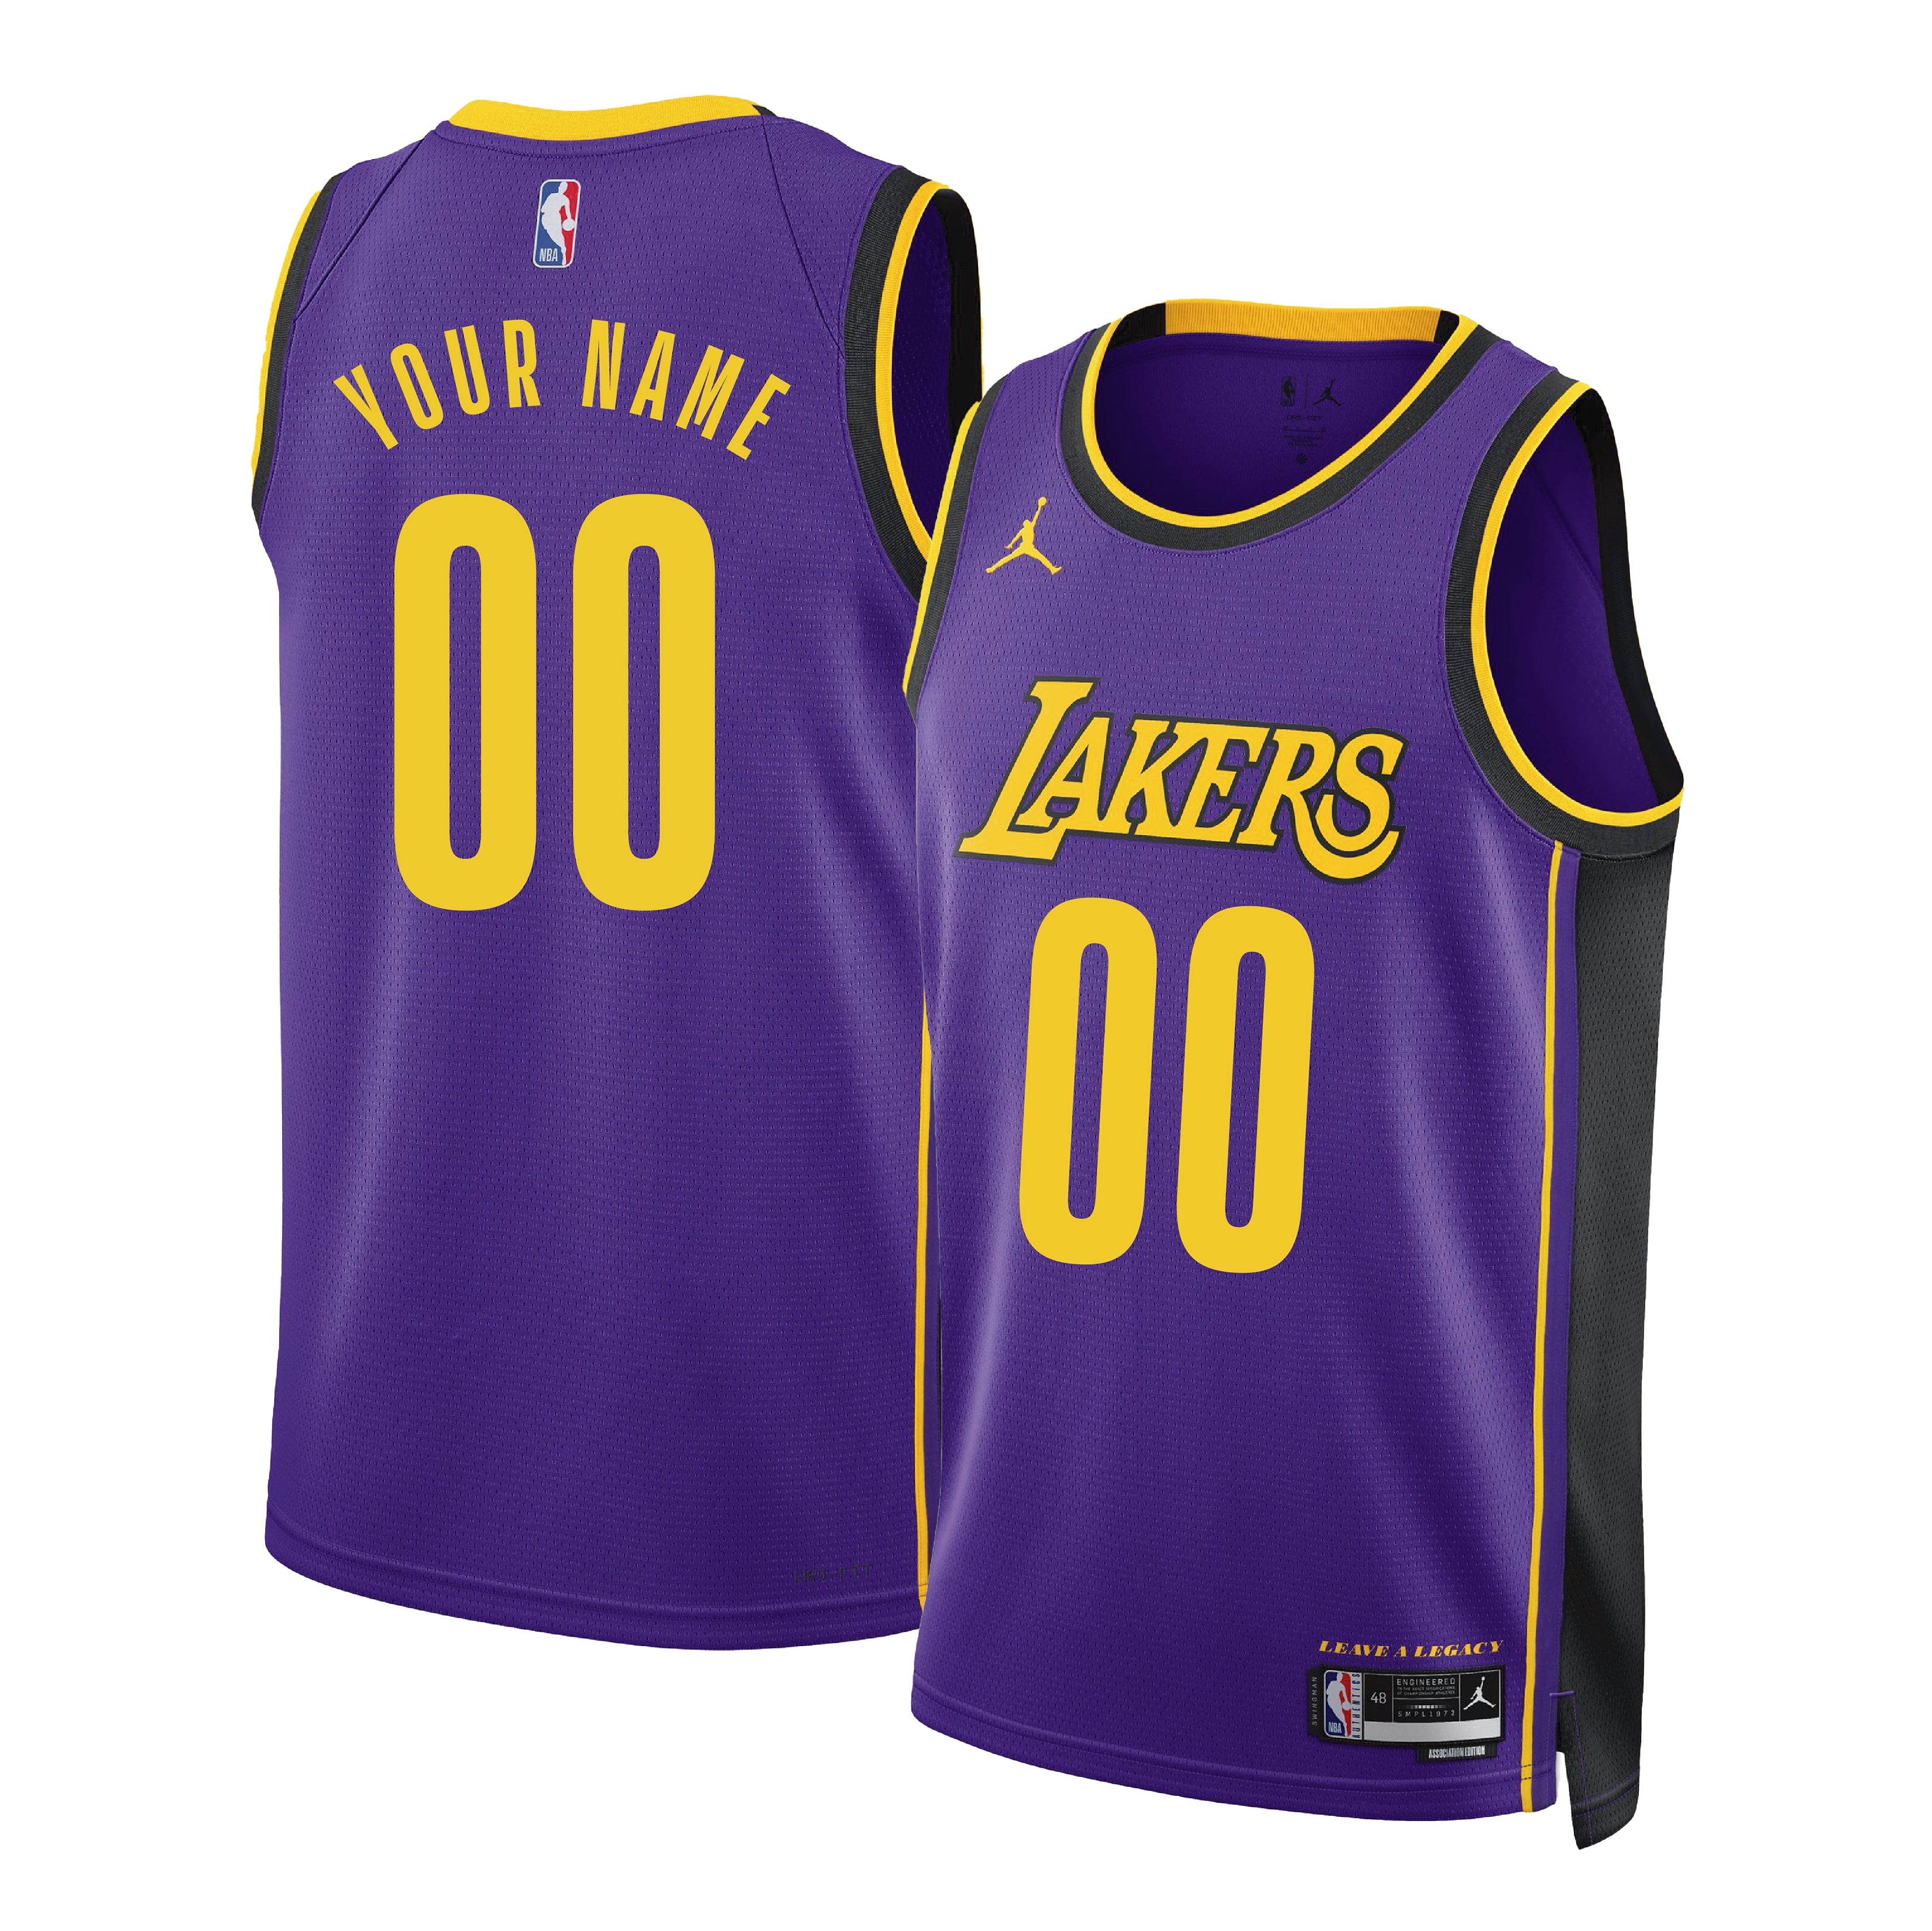 Shop Hardwood Classics Collections Online - NBA Store Middle East - UAE